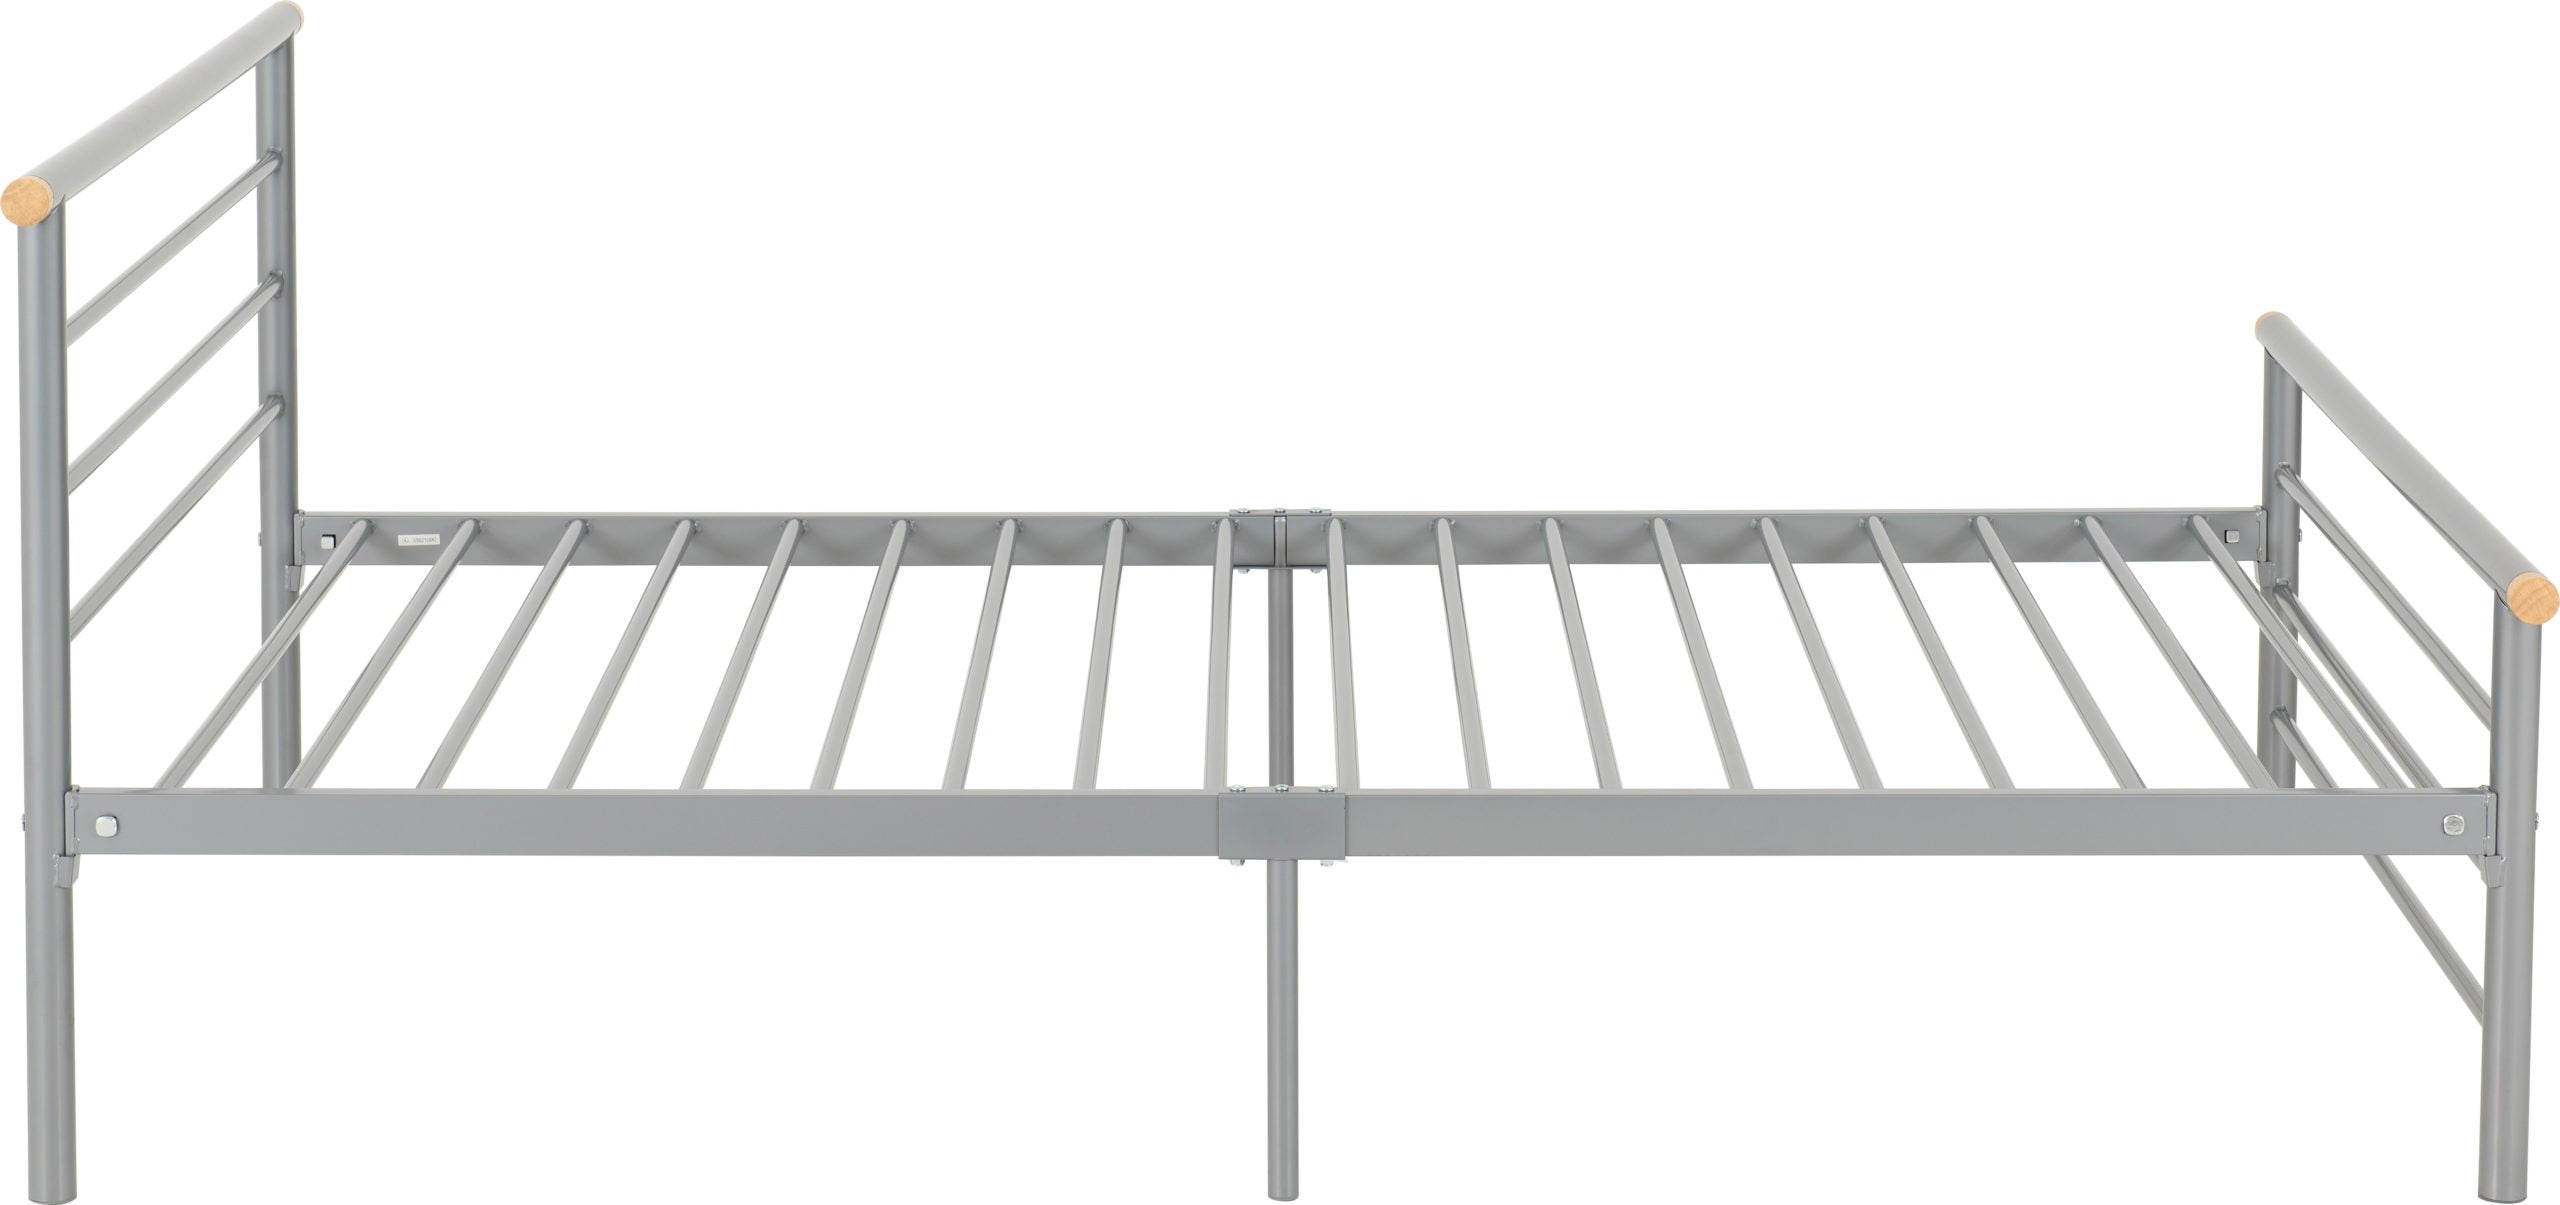 Orion 4'6" Bed